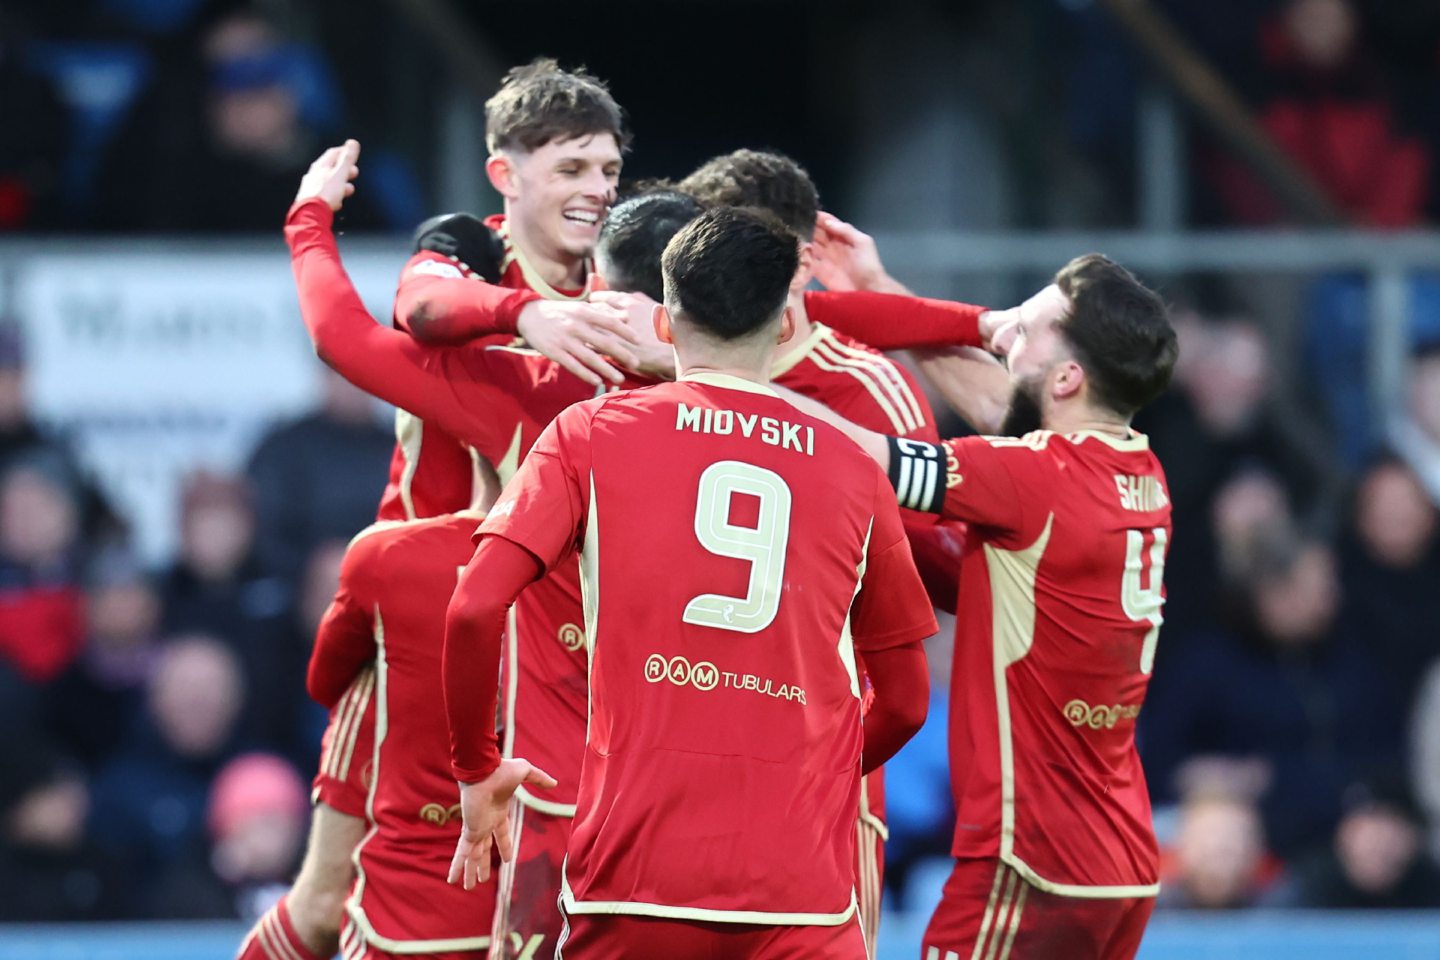 Jamie McGrath (7) of Aberdeen celebrates scoring his second goal against Ross County. Image: Shutterstock 